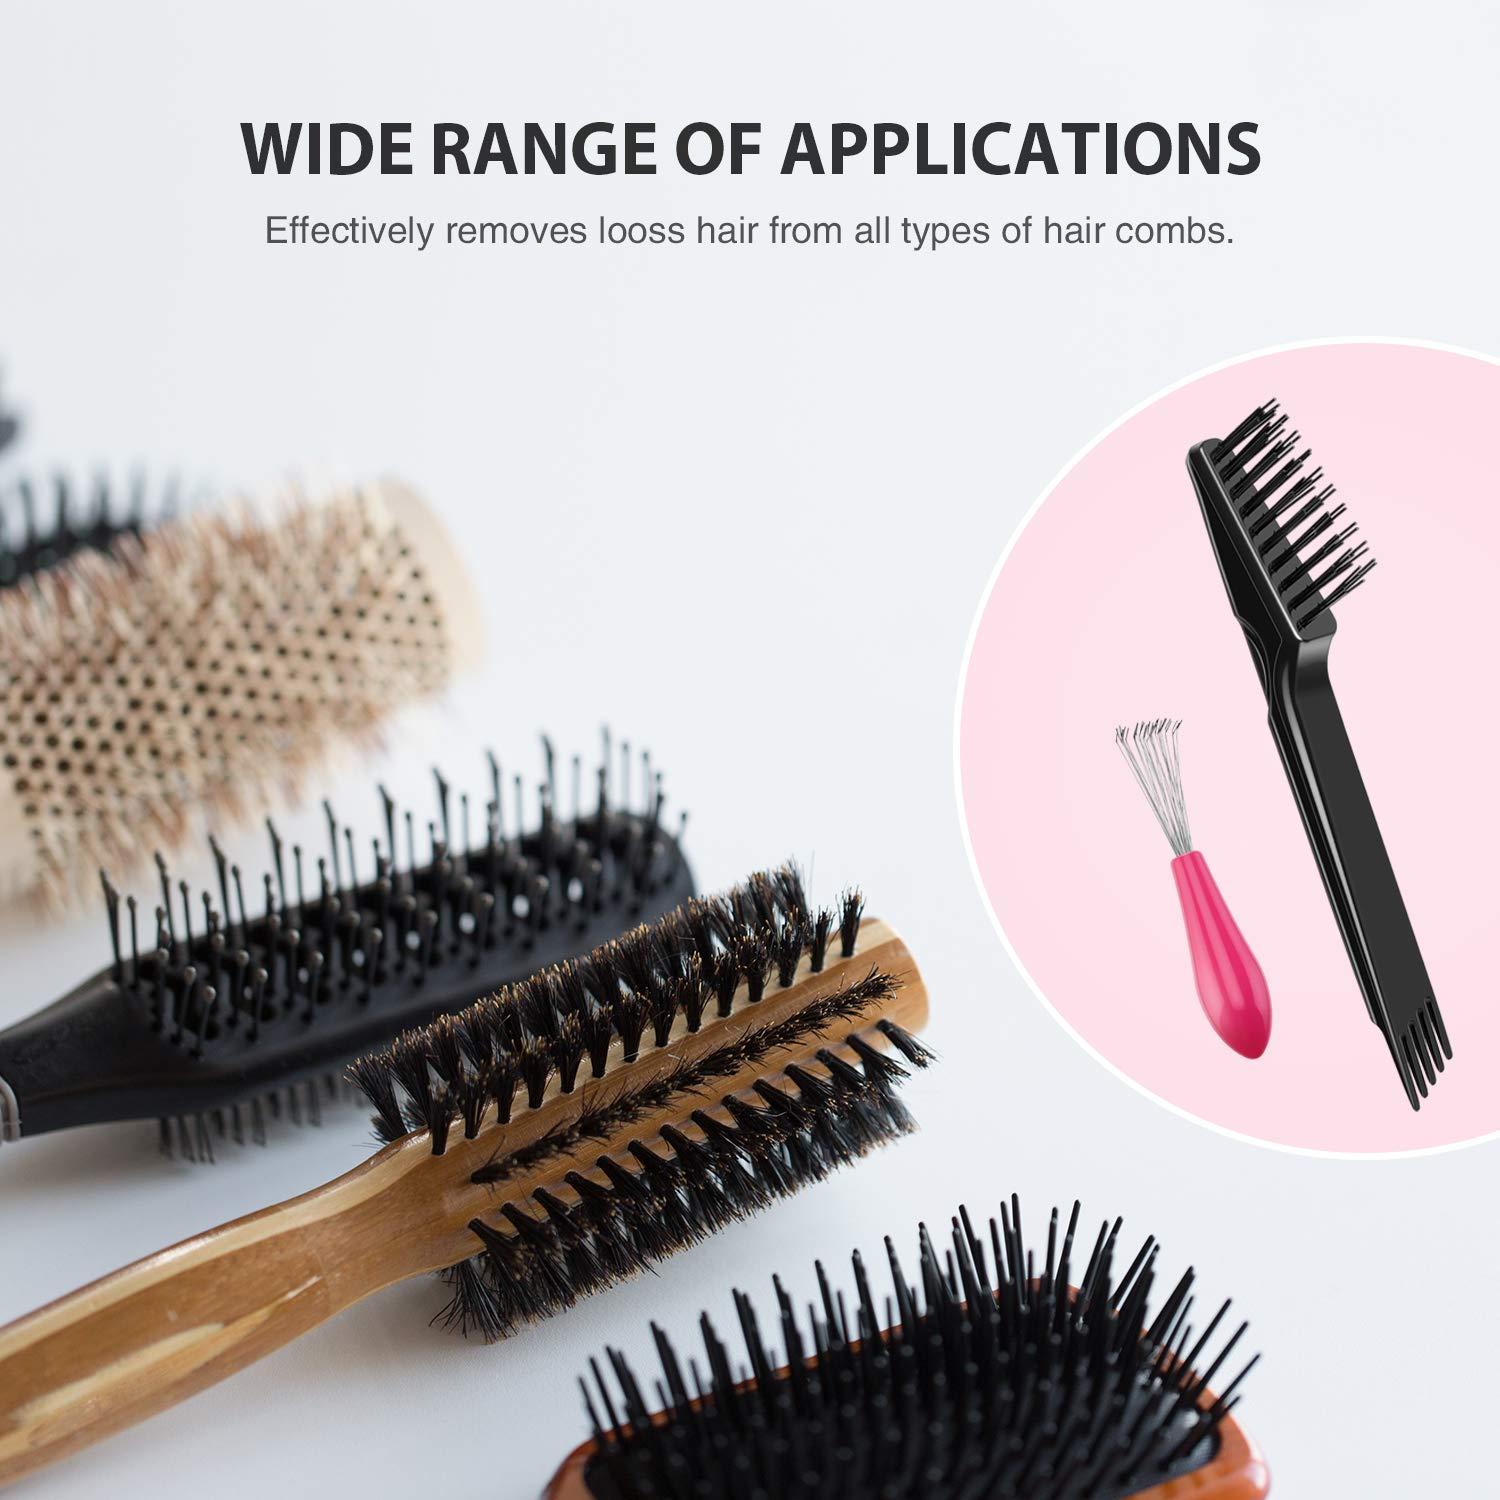 Cleaning Brush: What Is It? How Is It Made? Types & Uses